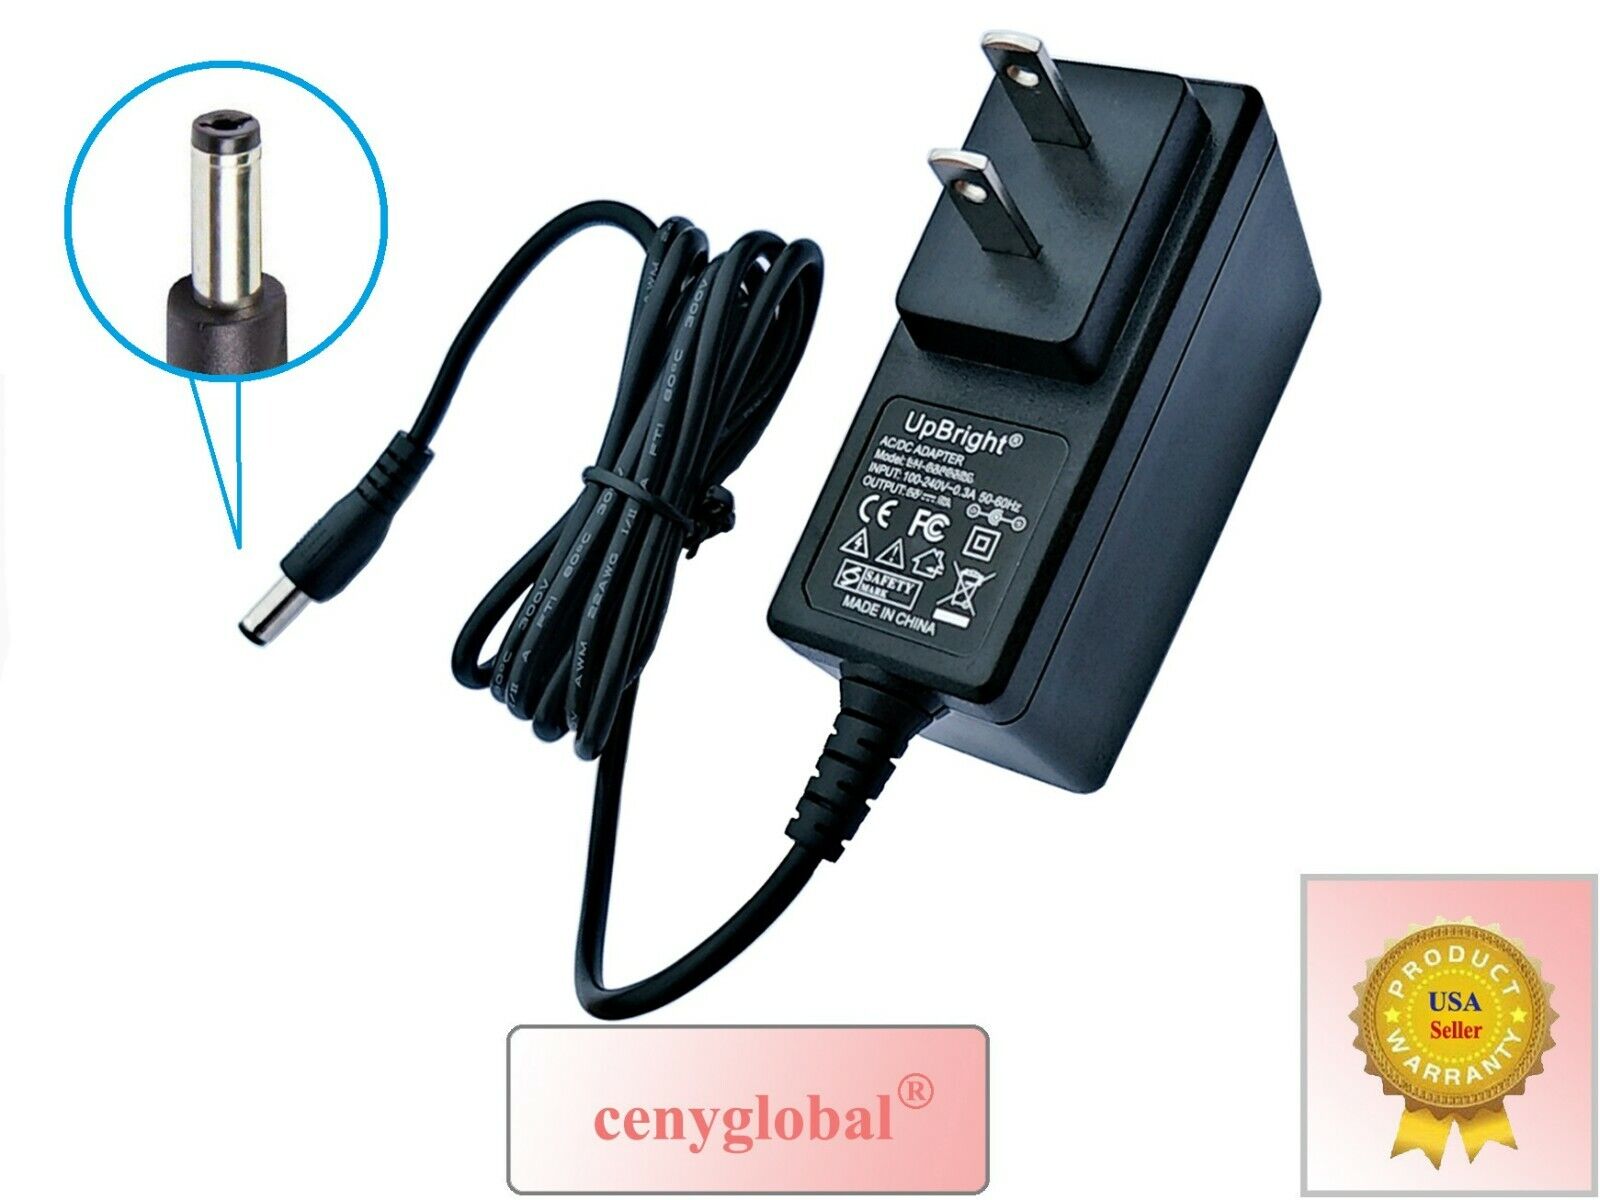 Global AC Adapter Charger For Model RD1200500 12V 500mA Switching Power Supply